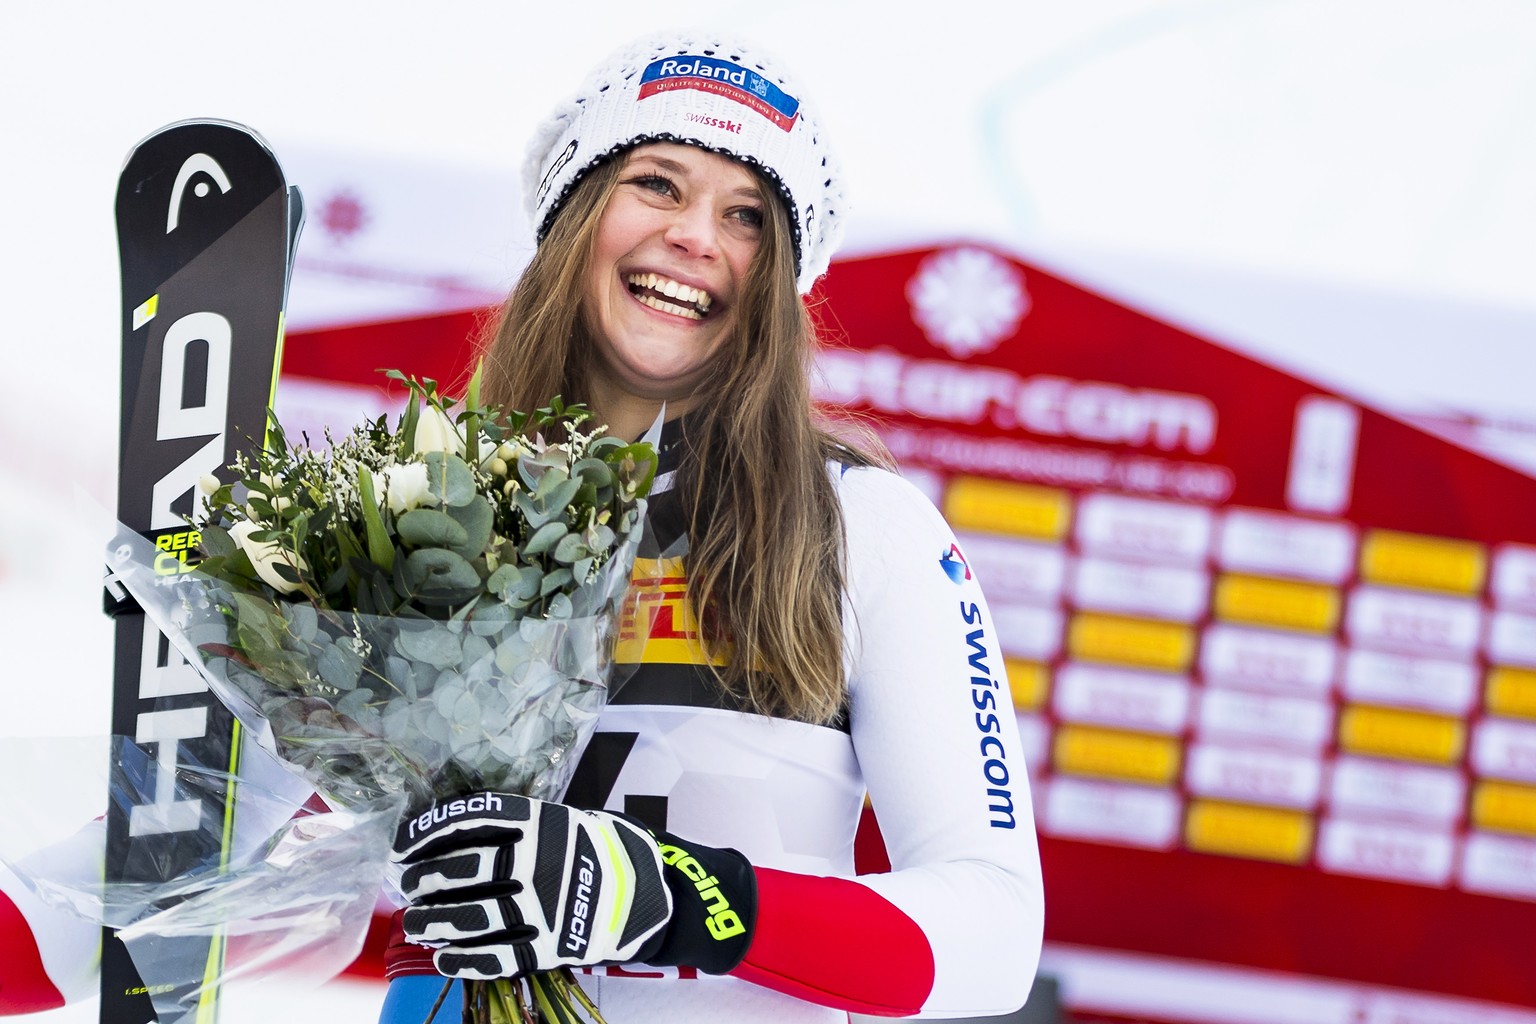 epa07345470 Corinne Suter of Switzerland celebrates in the finish area after taking the third place in the women&#039;s Super G race at the 2019 FIS Alpine Skiing World Championships in Are, Sweden, 0 ...